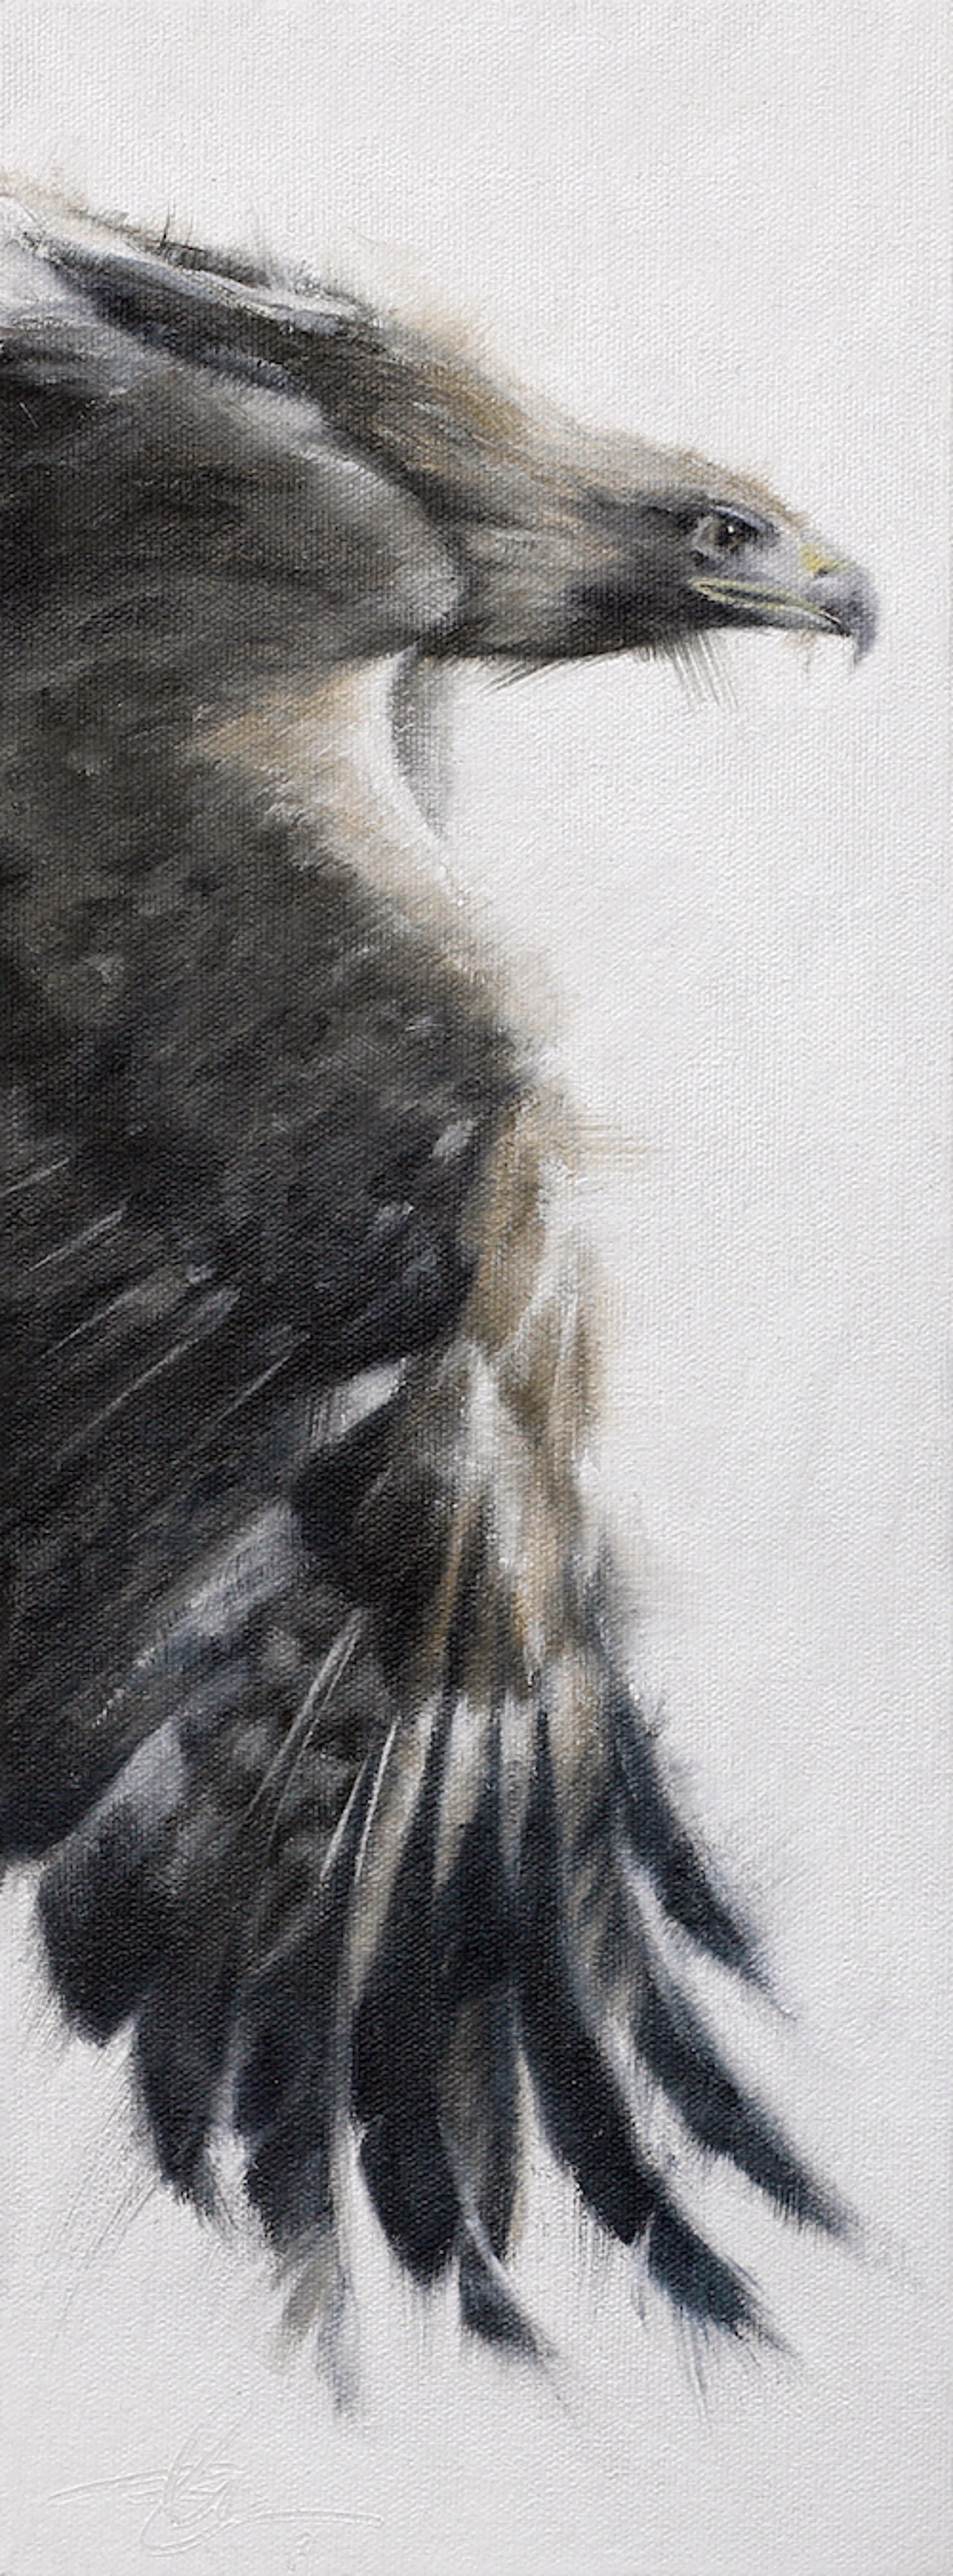 Original Oil Painting Of a Golden Eagle In Flight By Doyle Hostetler